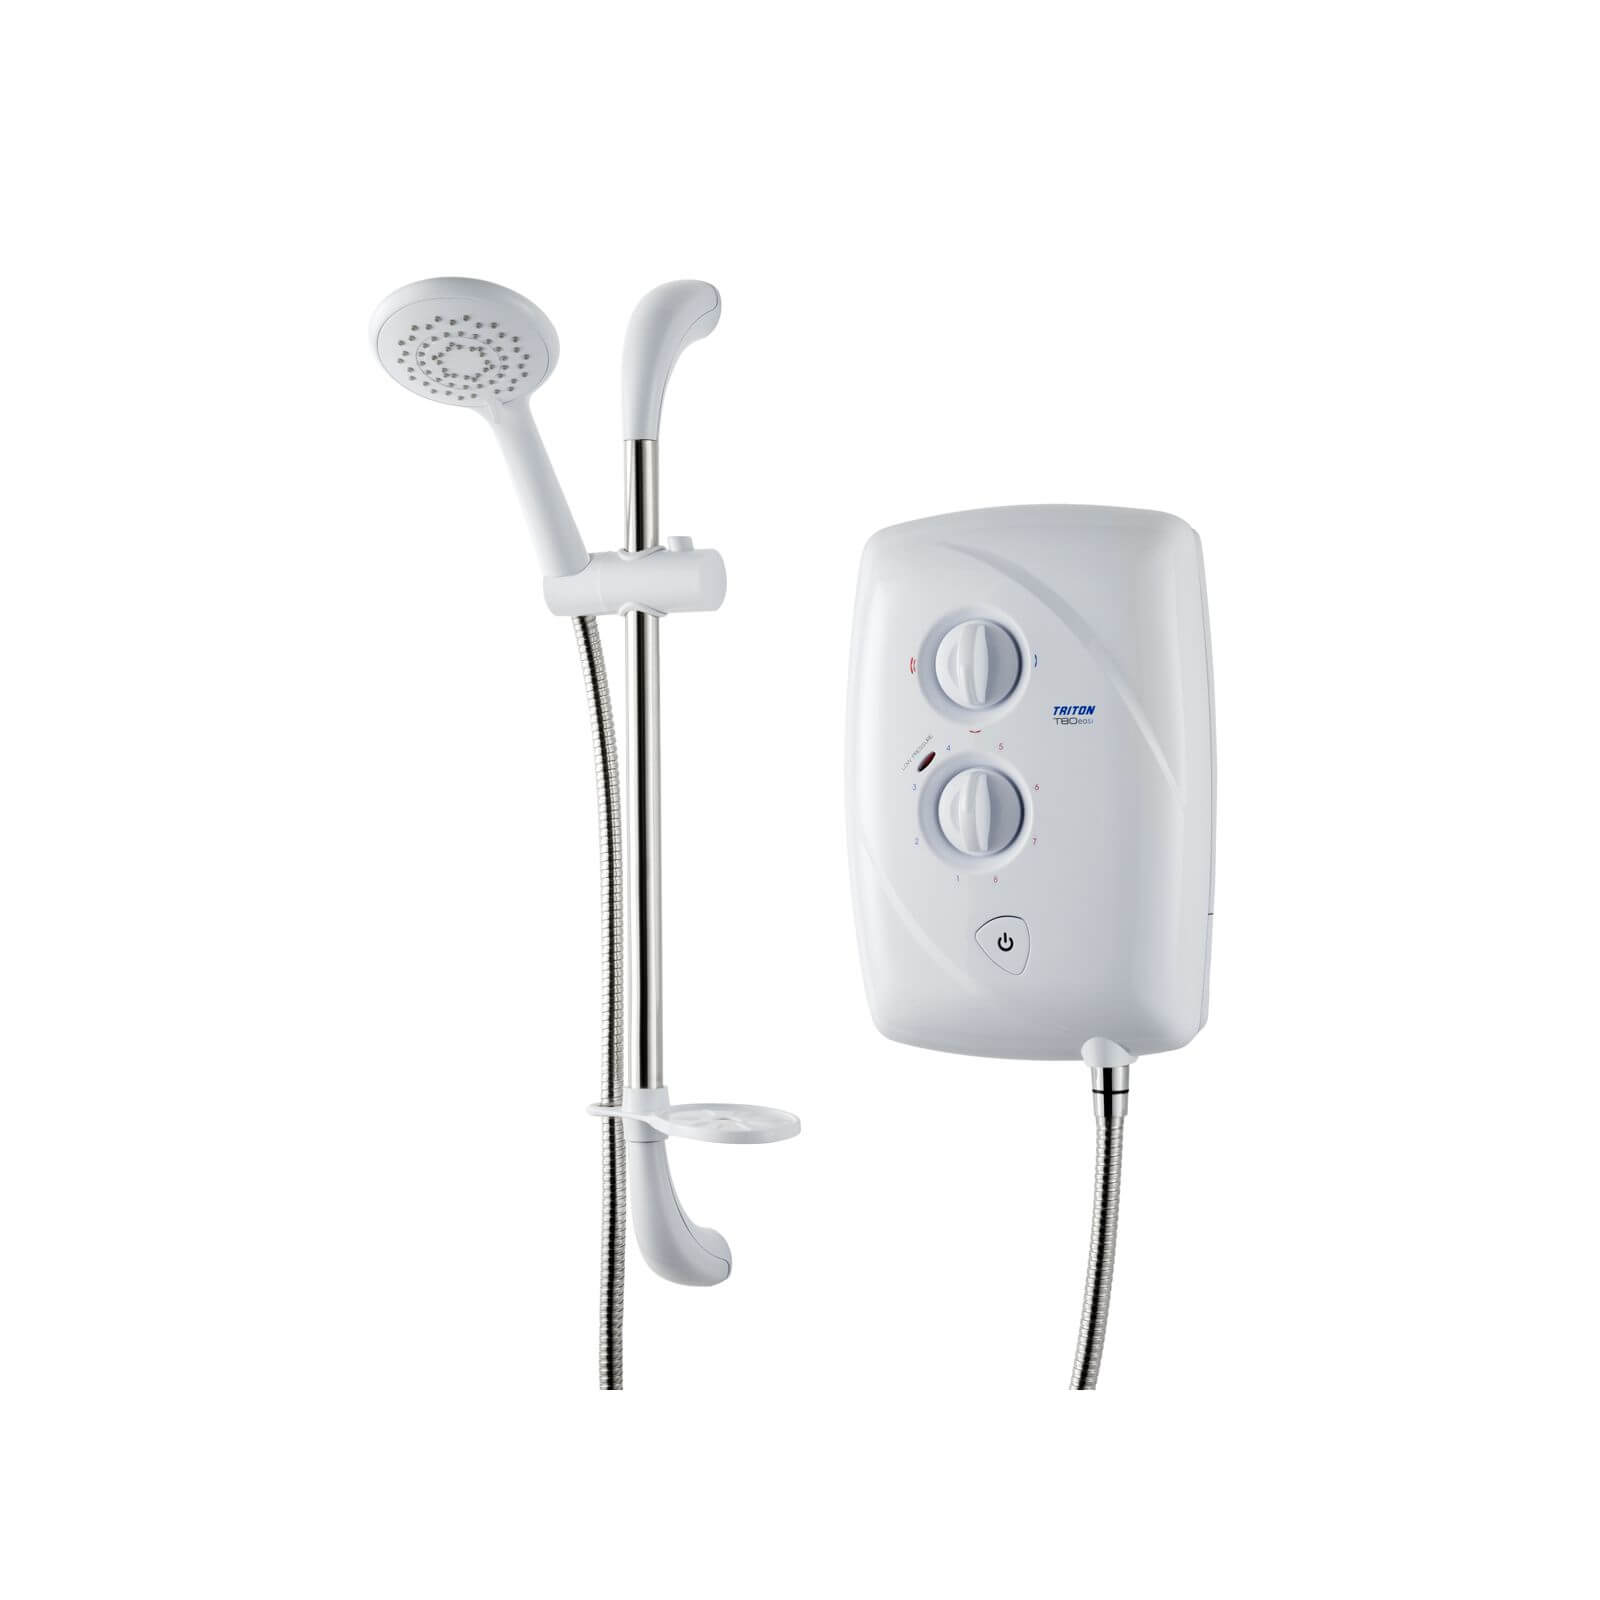 Triton T80Easi-Fit 8.5kW Electric Shower - White